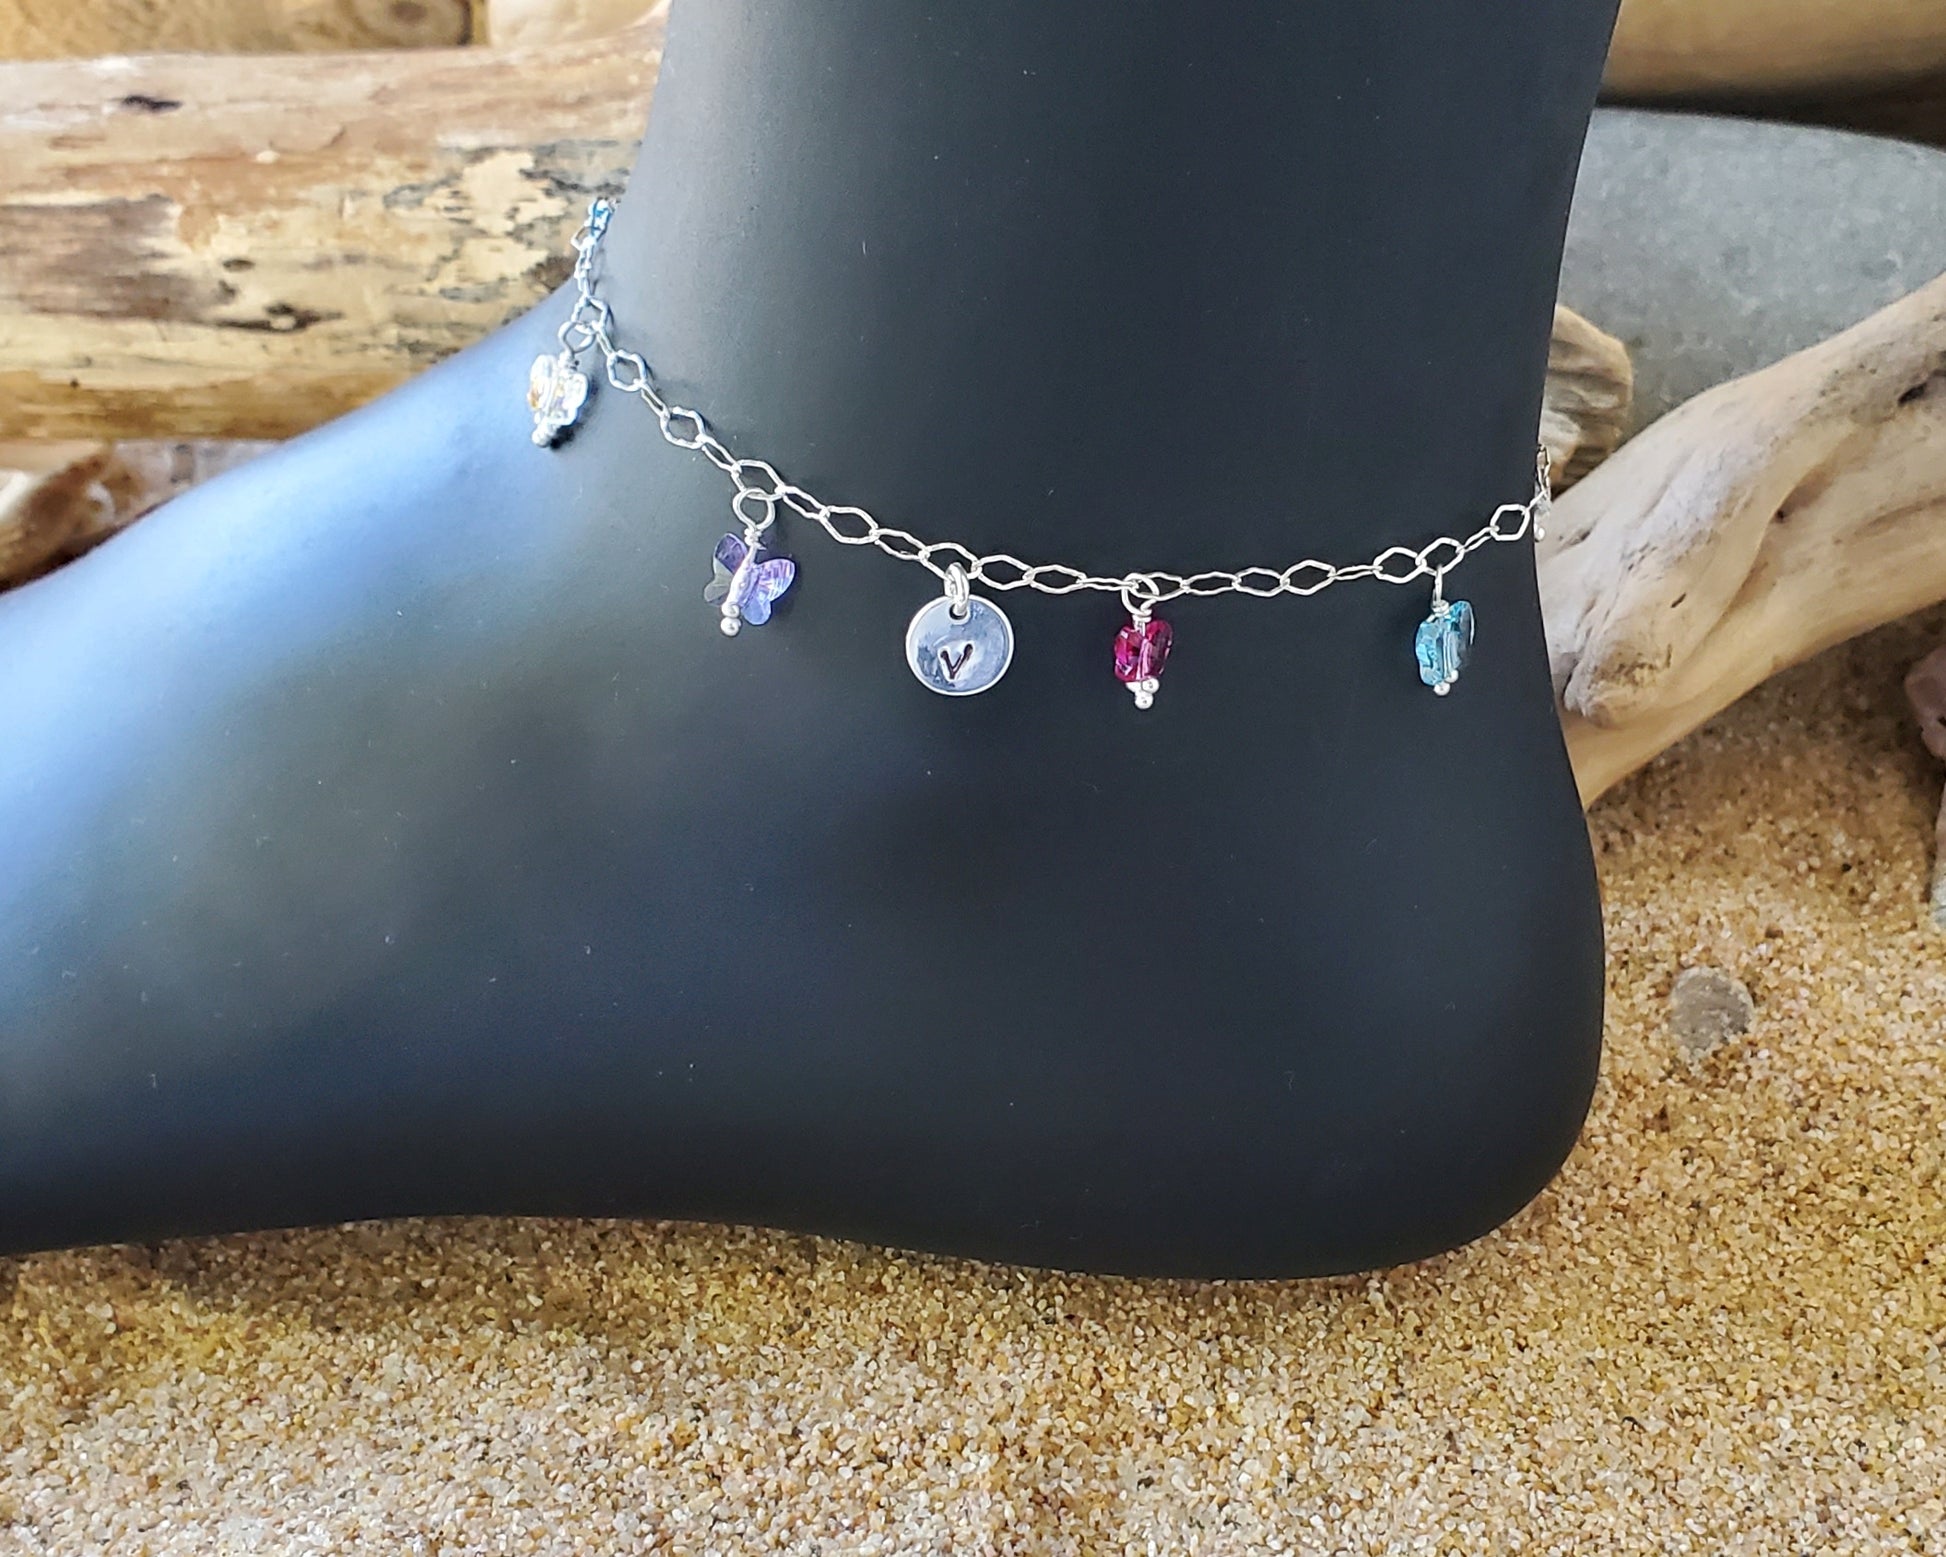 Personalized Crystal Butterfly Dangle Initial Anklet, Ankle Bracelet, Sterling Silver diamond shaped chain with dangling Multi Color Crystal Butterflies and an Initial Pendant 